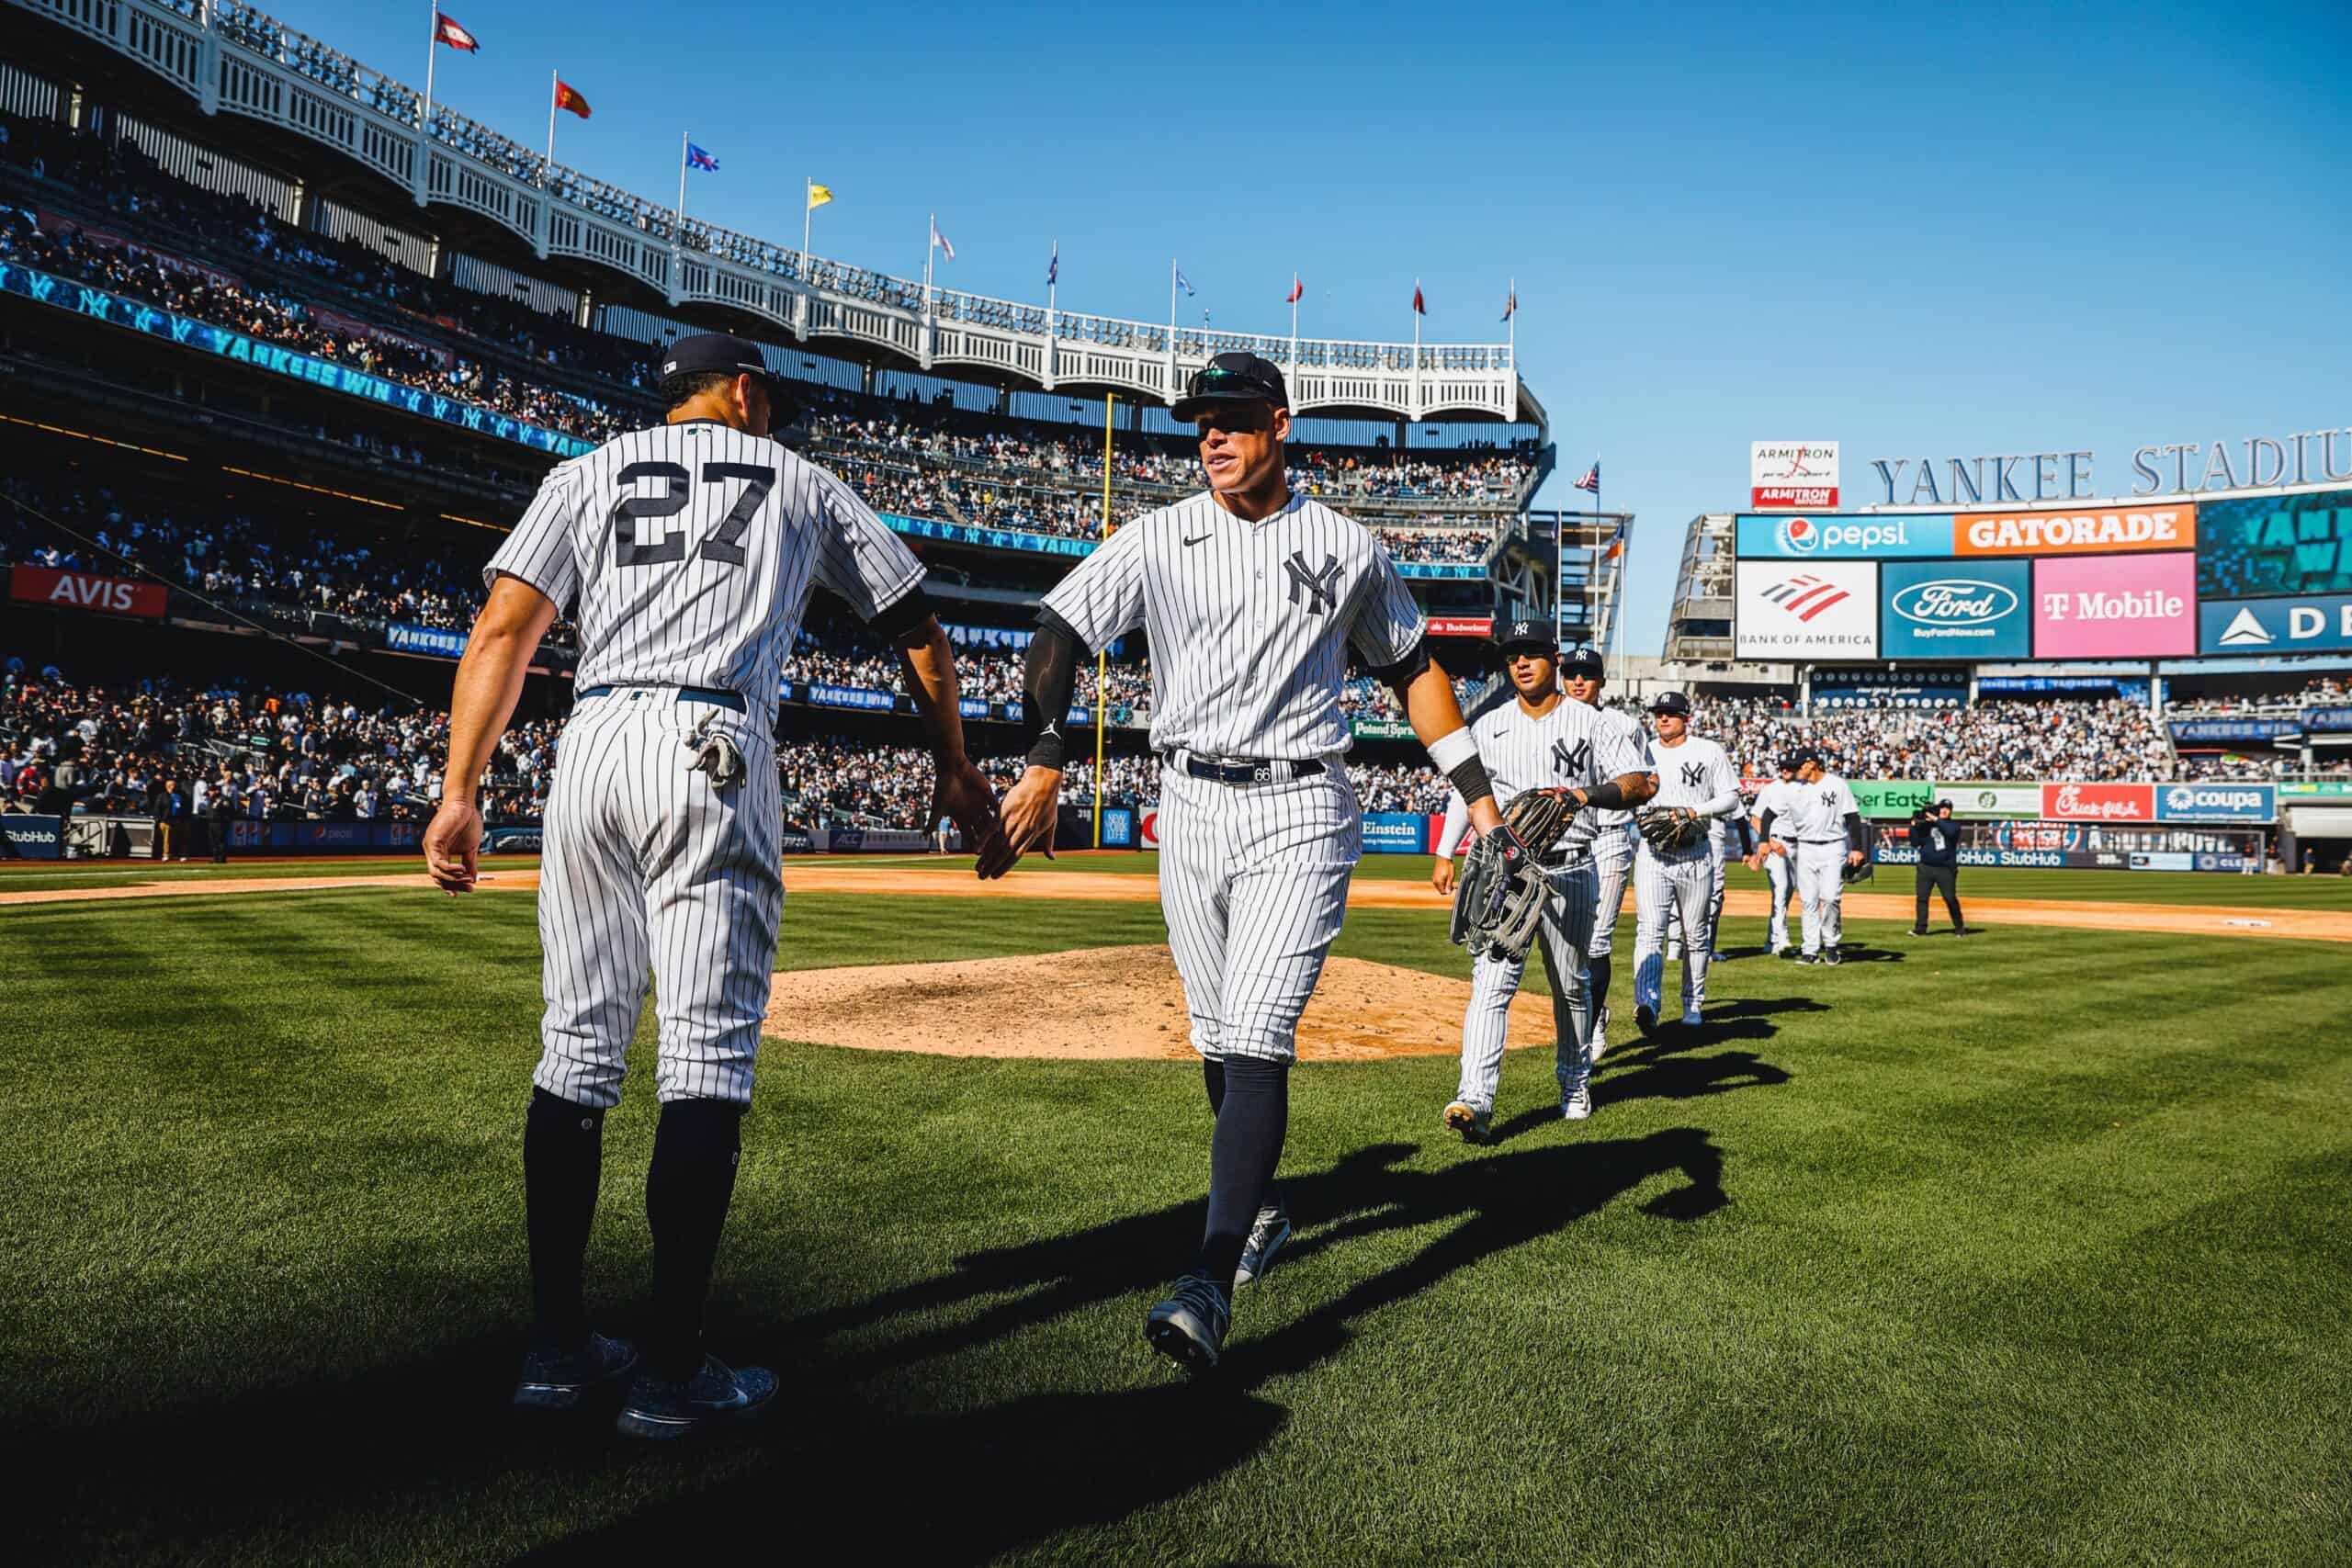 Yankees' Ron Marinaccio's first MLB win a special moment